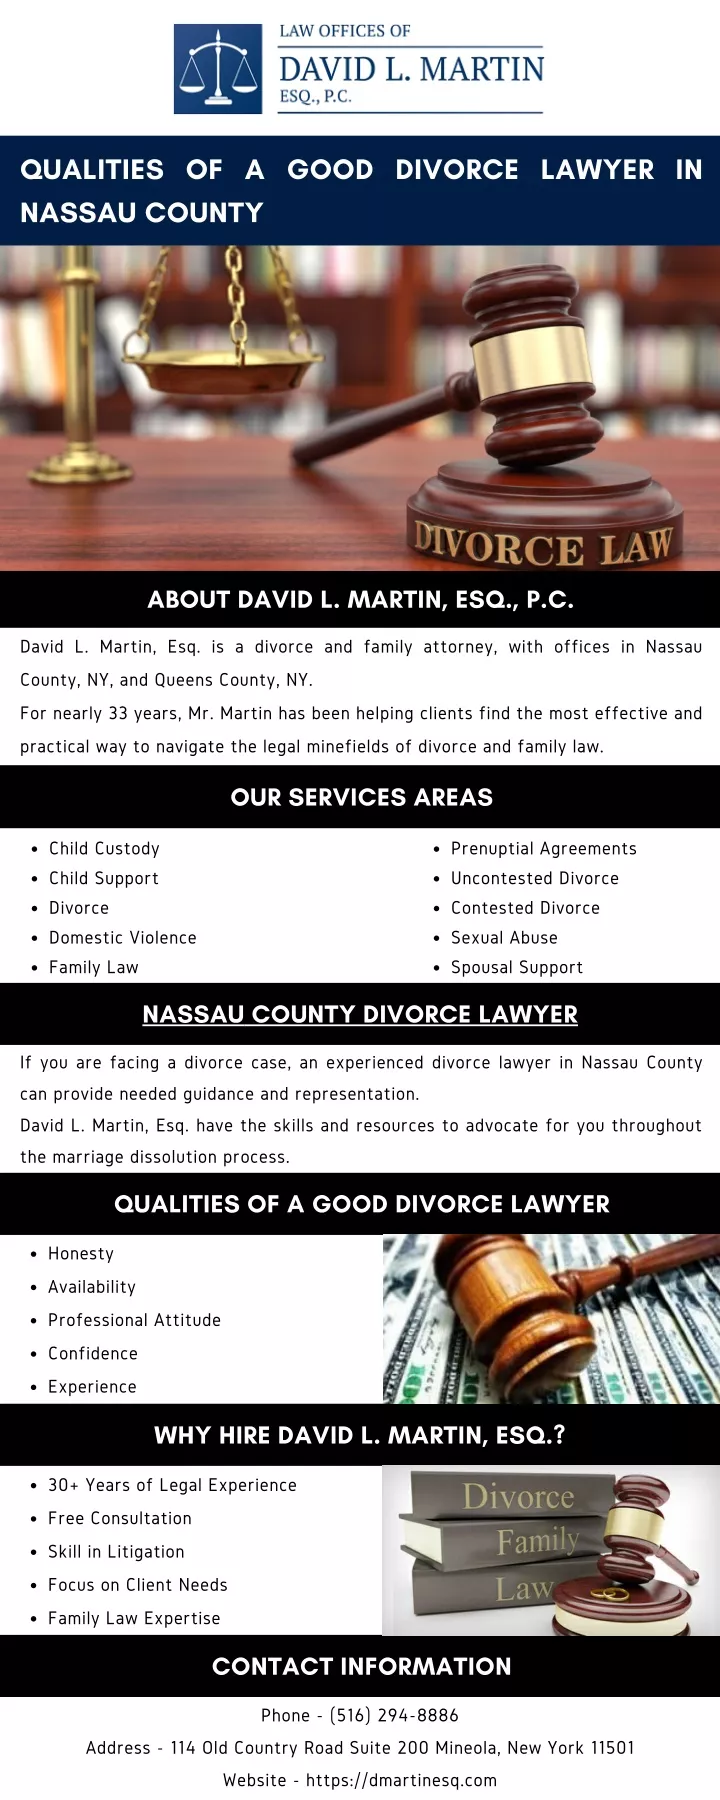 qualities of a good divorce lawyer in